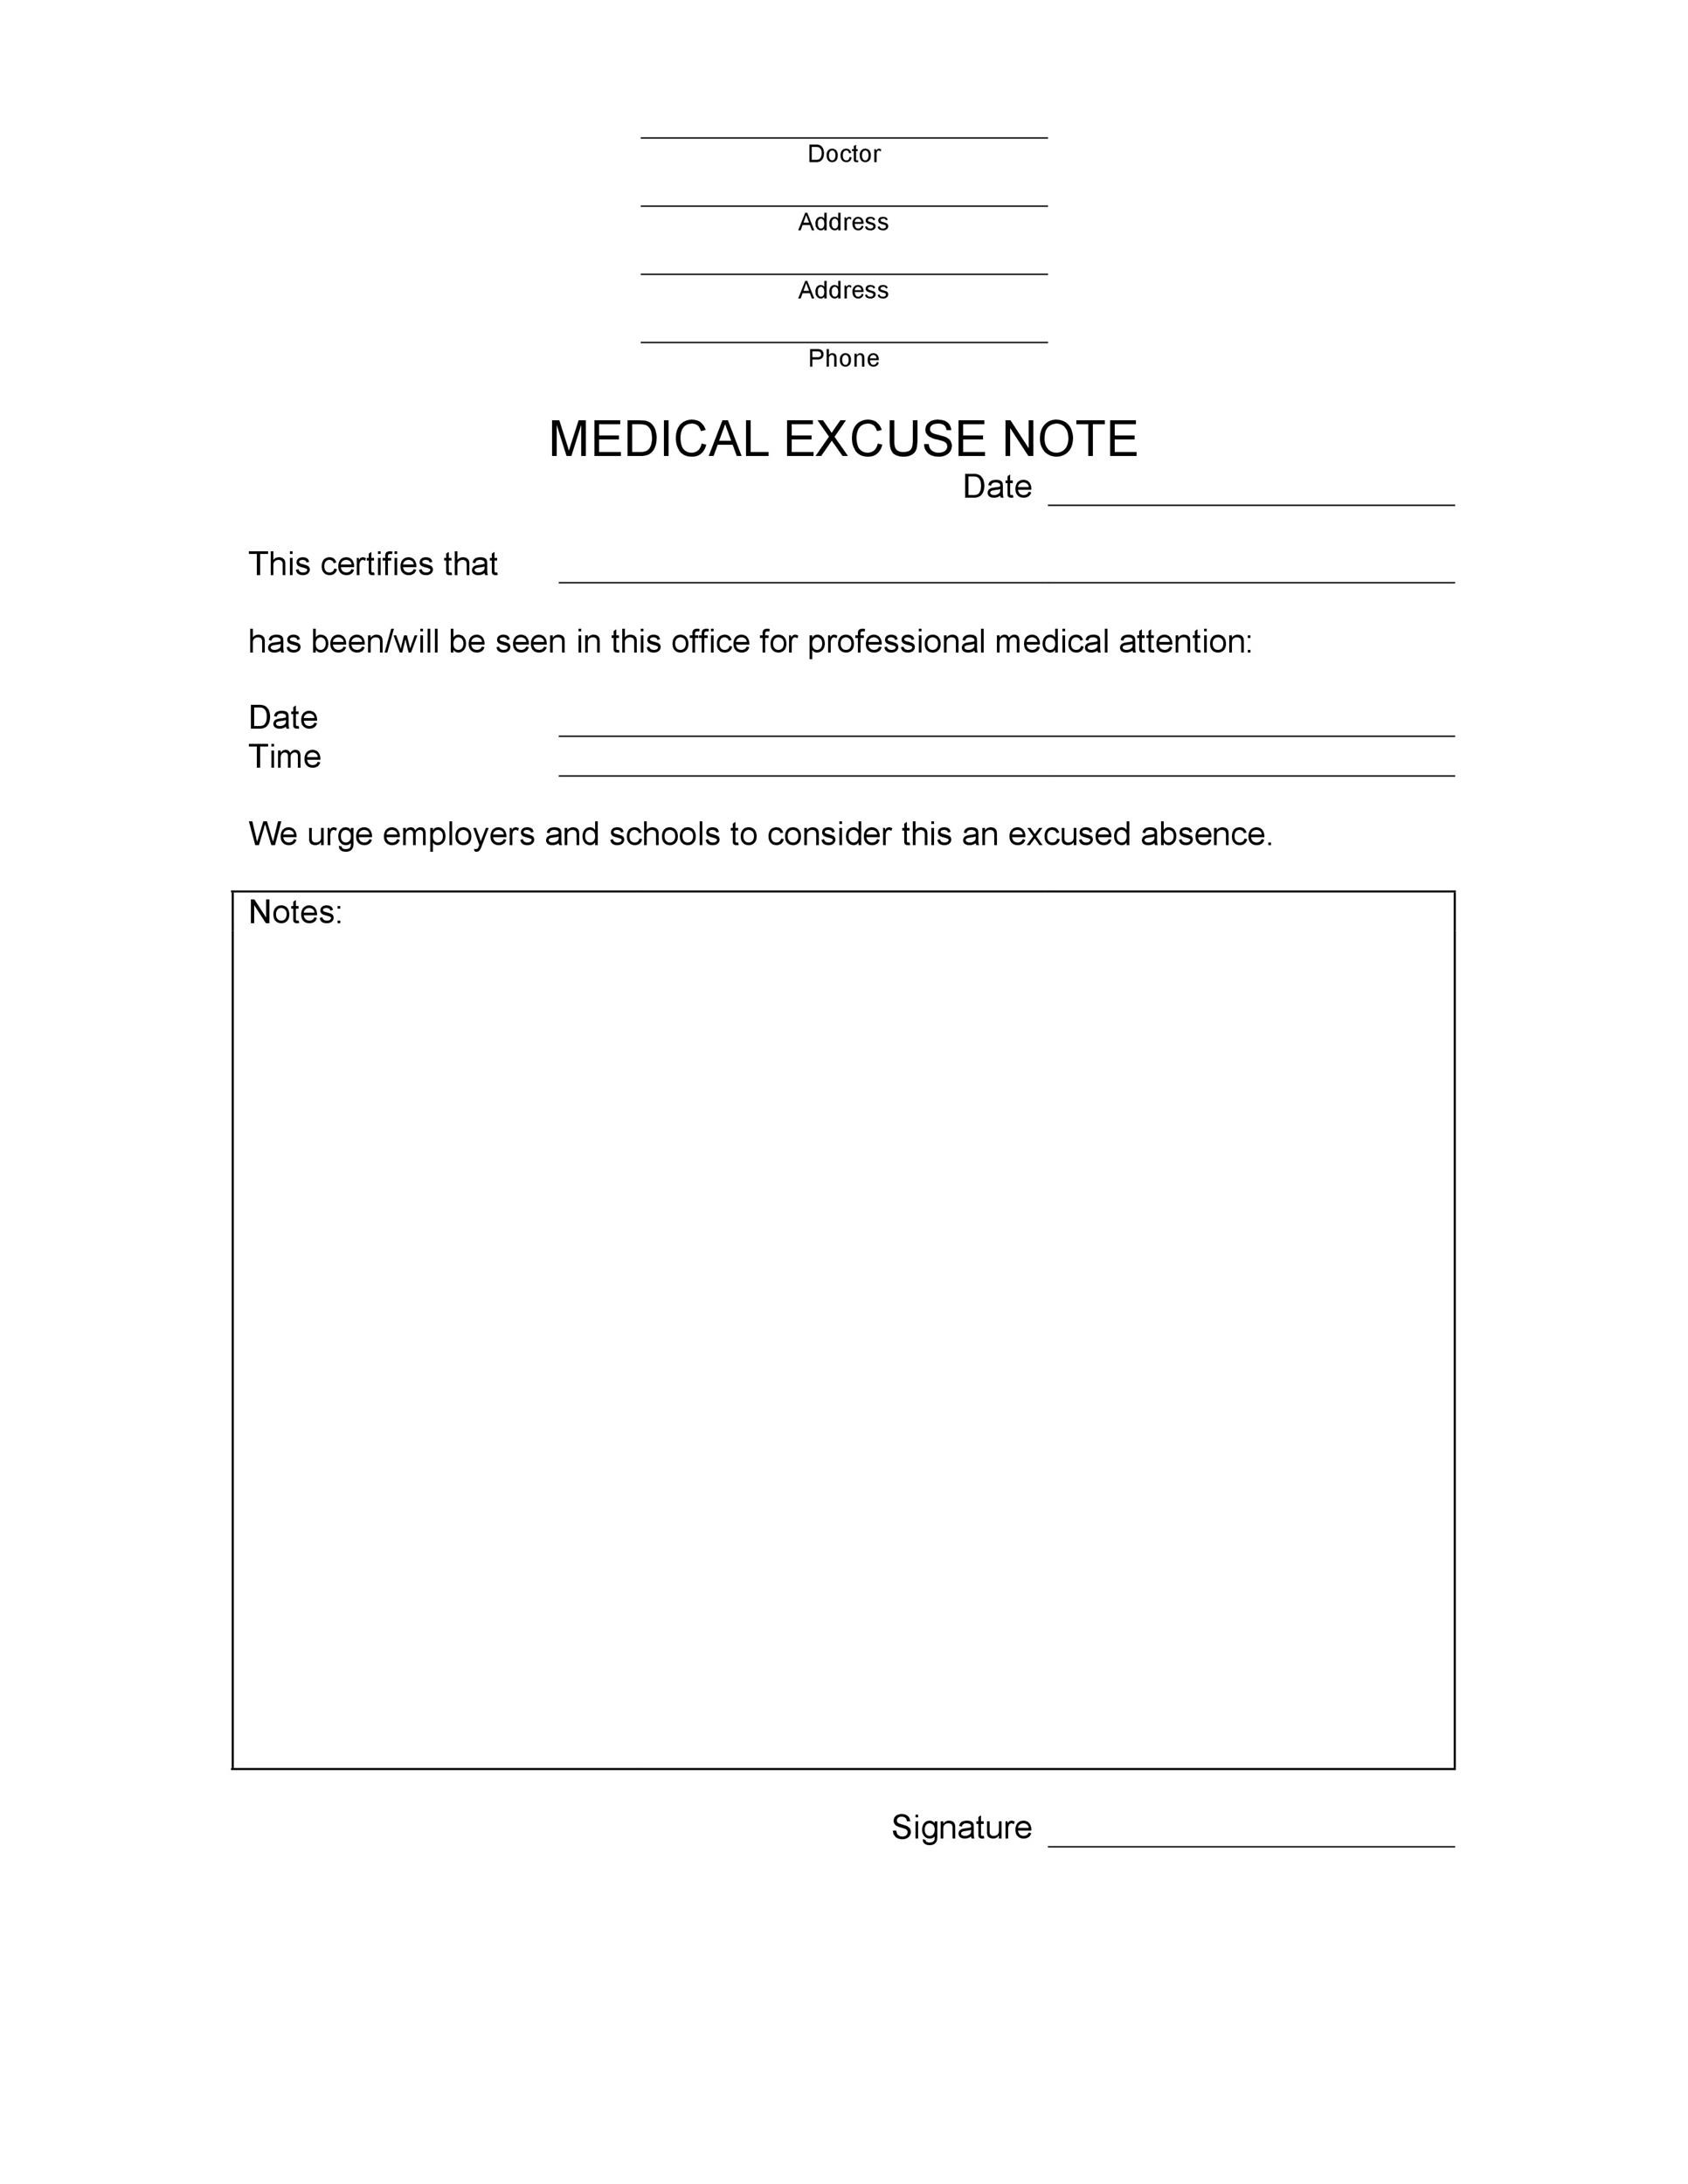 21+ Free Doctor Note / Excuse Templates ᐅ TemplateLab